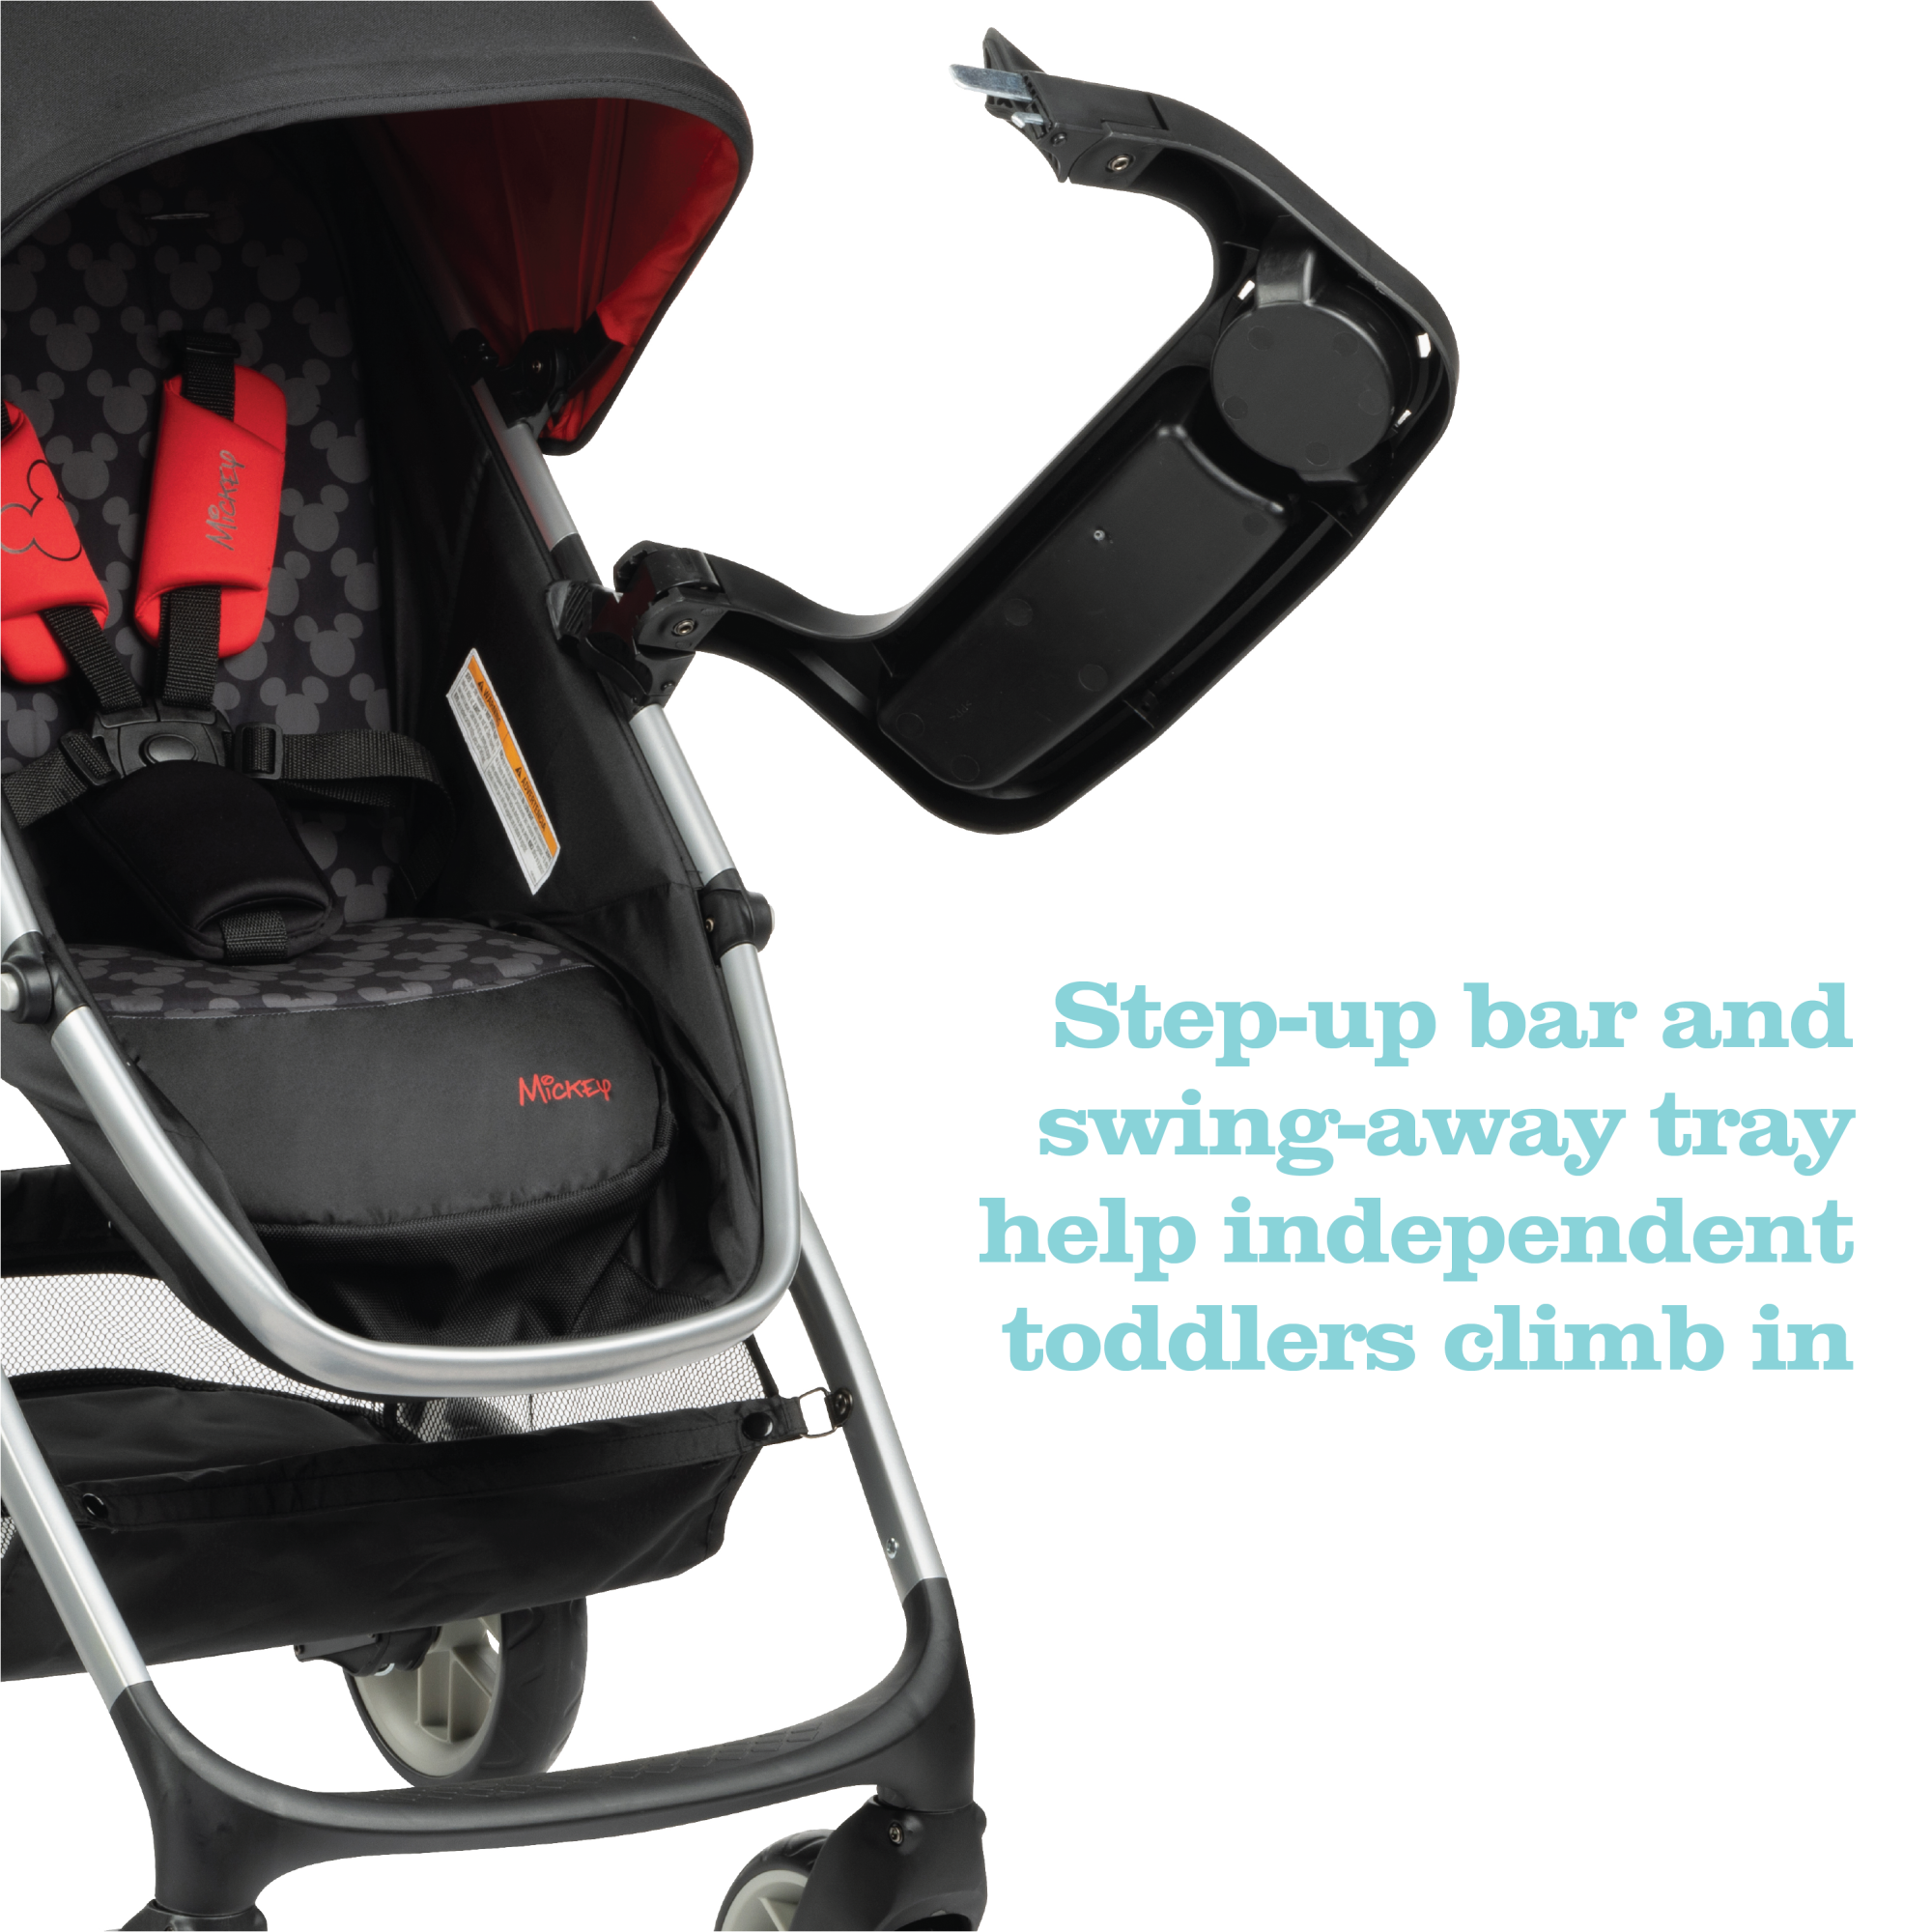 Disney Baby Grow and Go™ Modular Travel System - step-up bar and swing-away tray help independent toddlers climb in